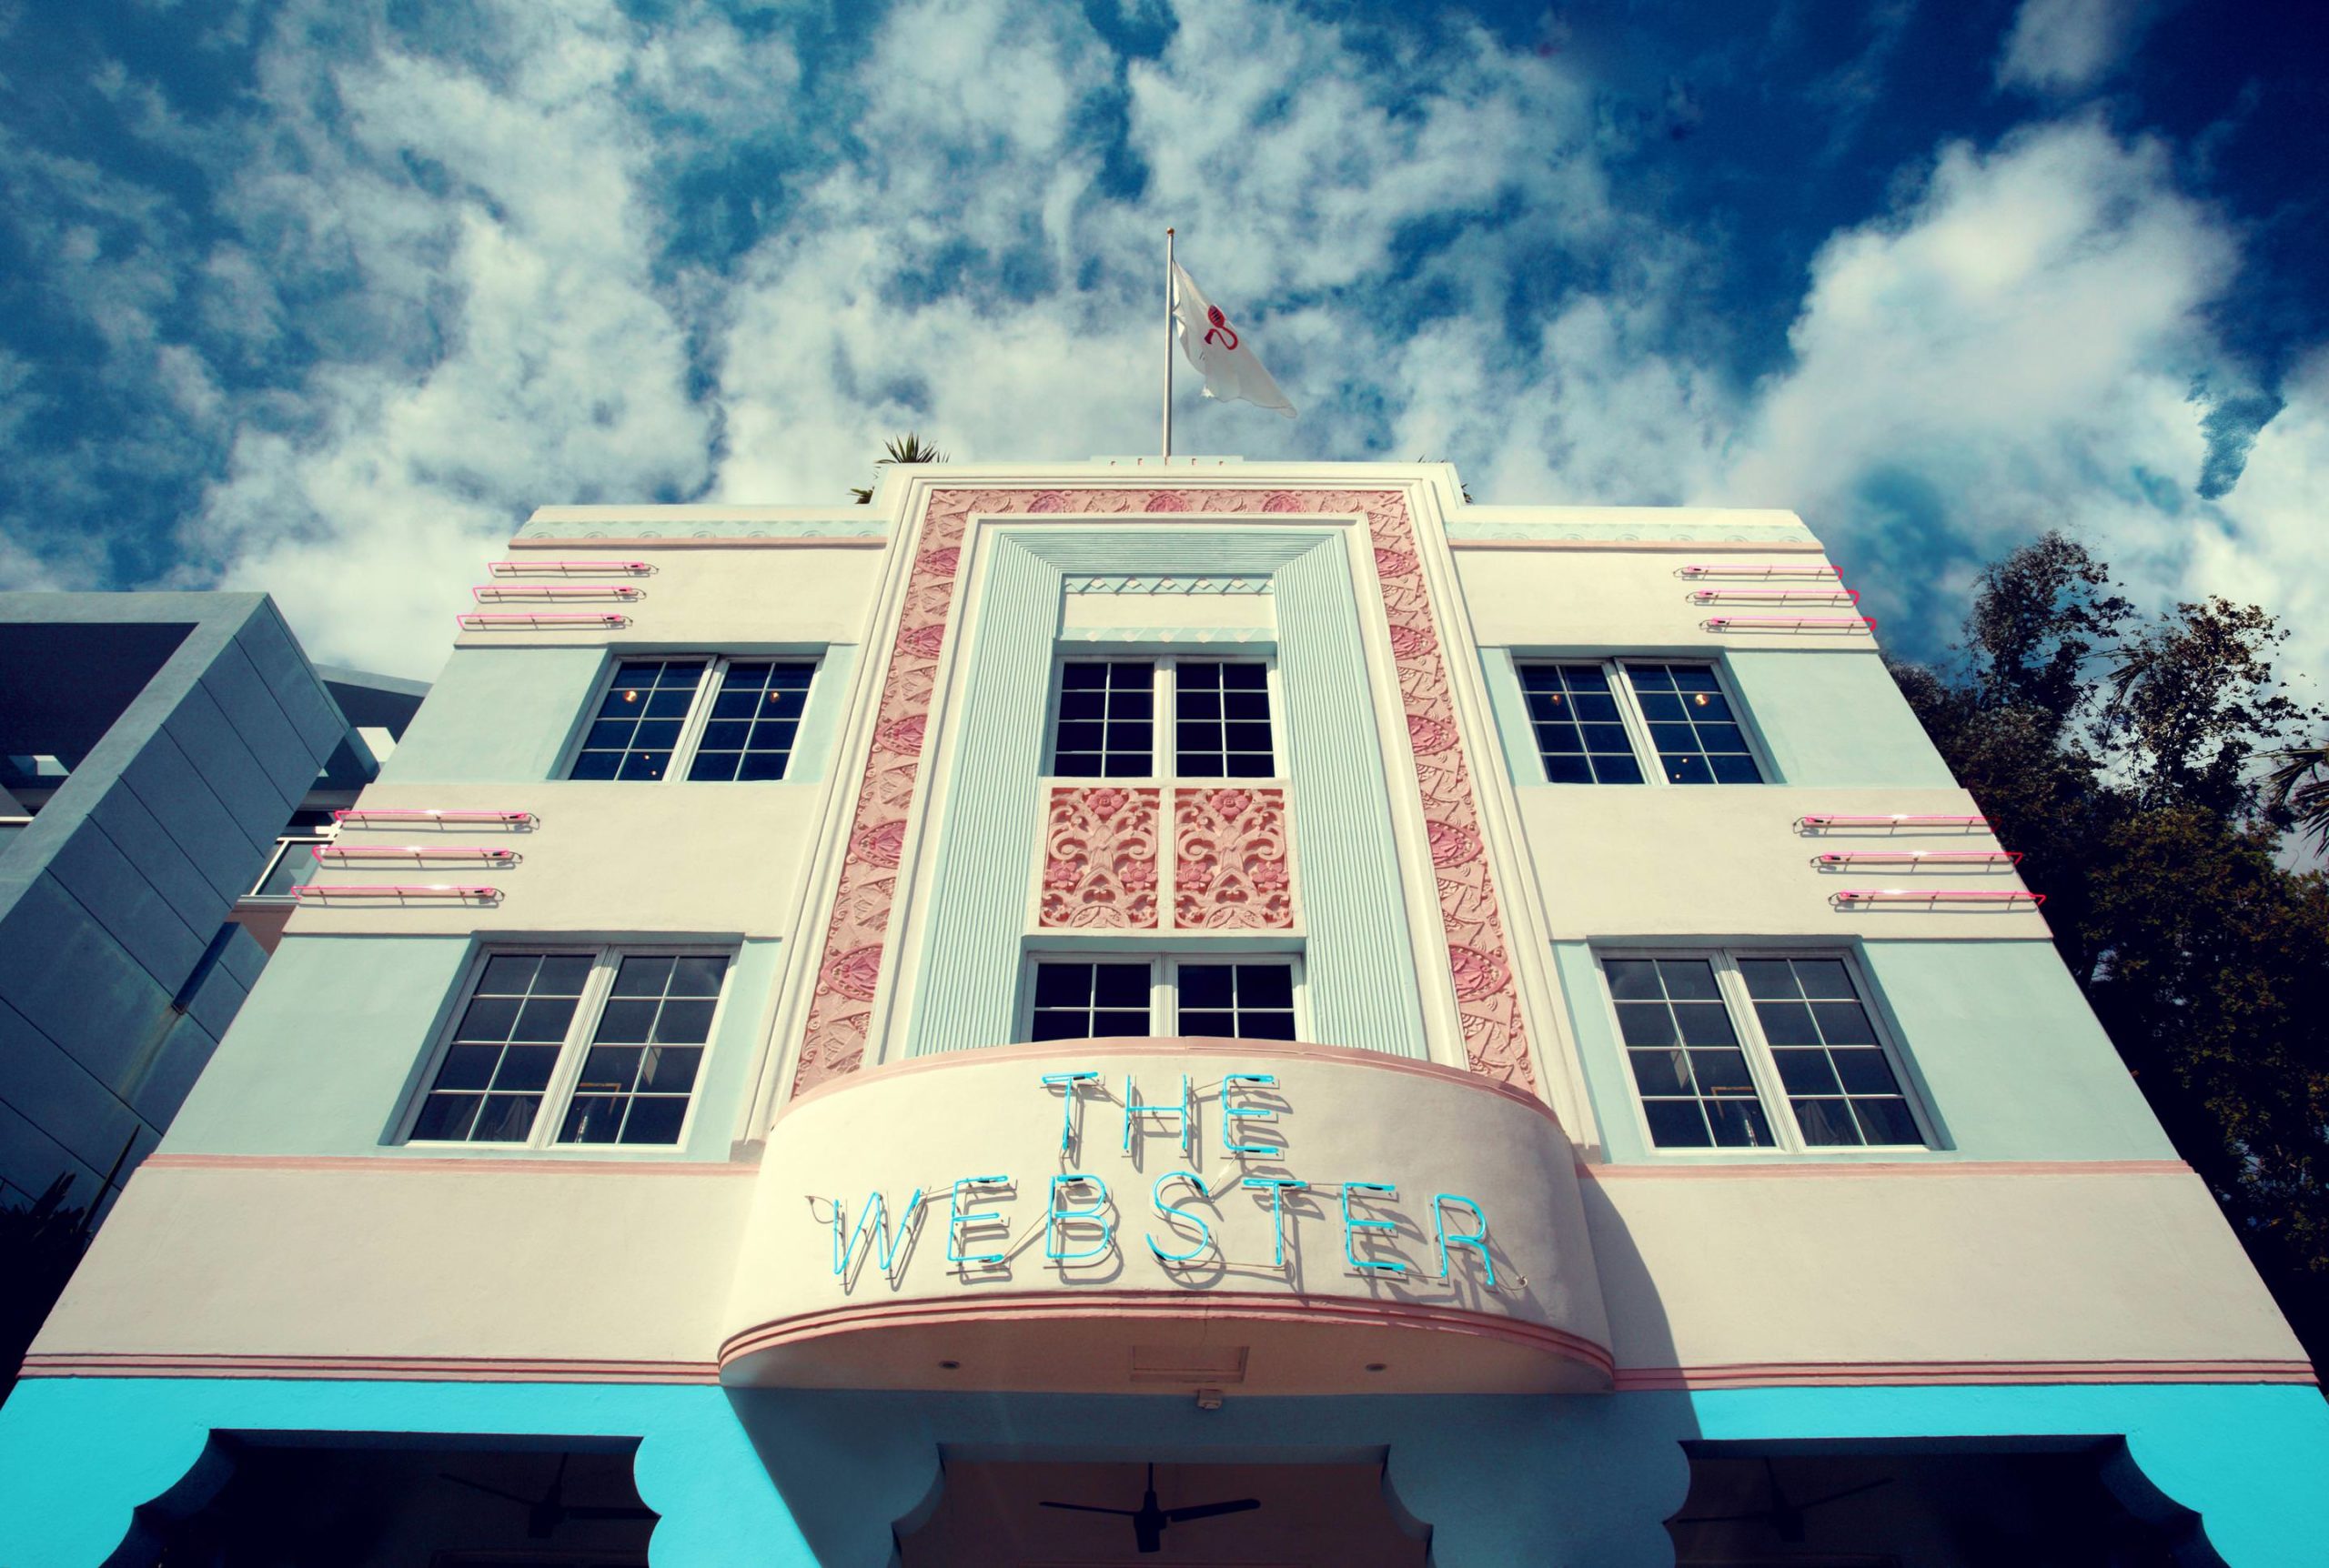 The Webster Miami